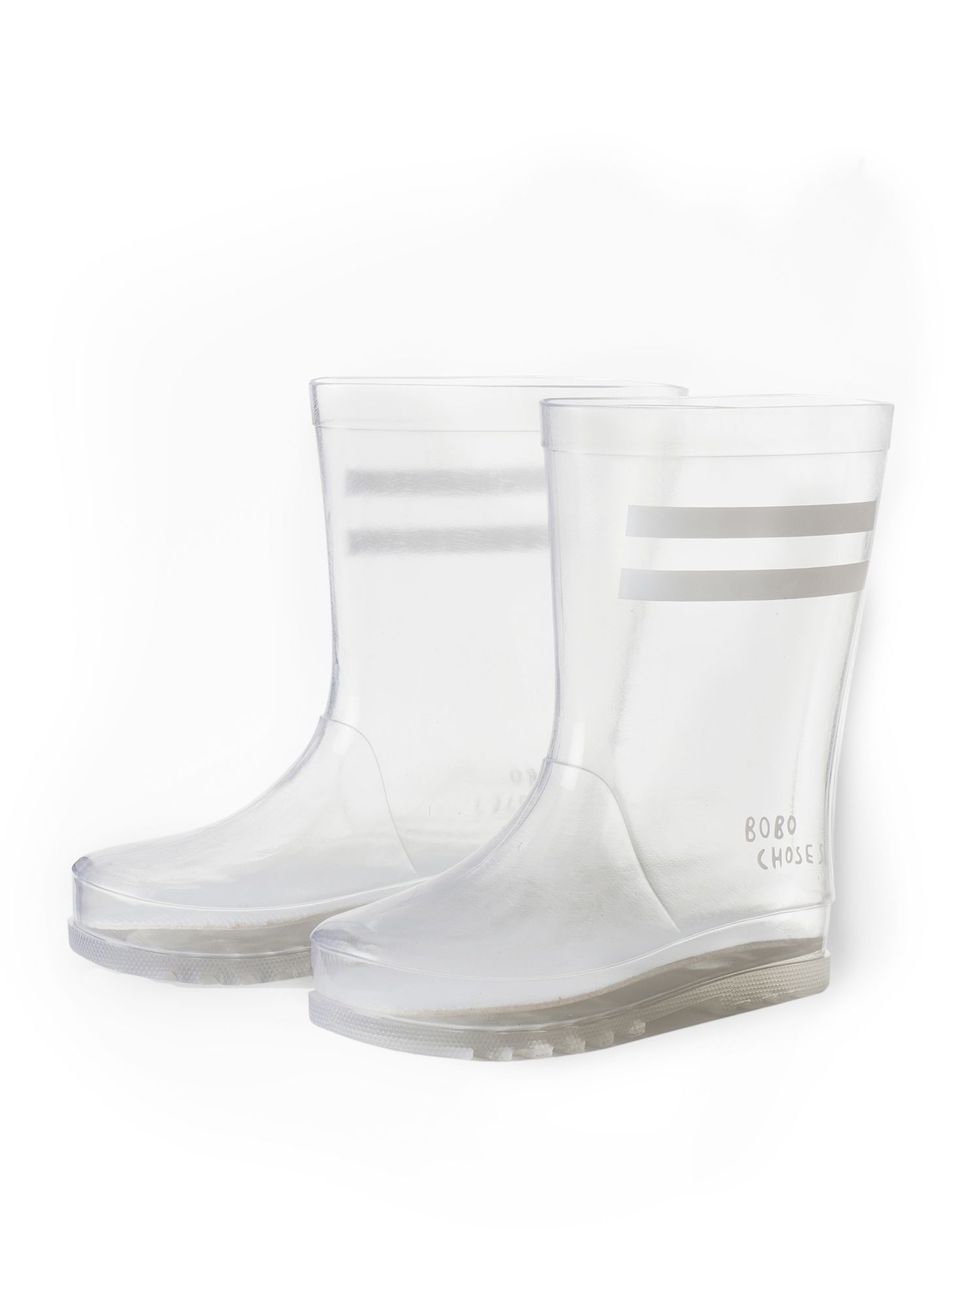 White, Footwear, Product, Shoe, Boot, 